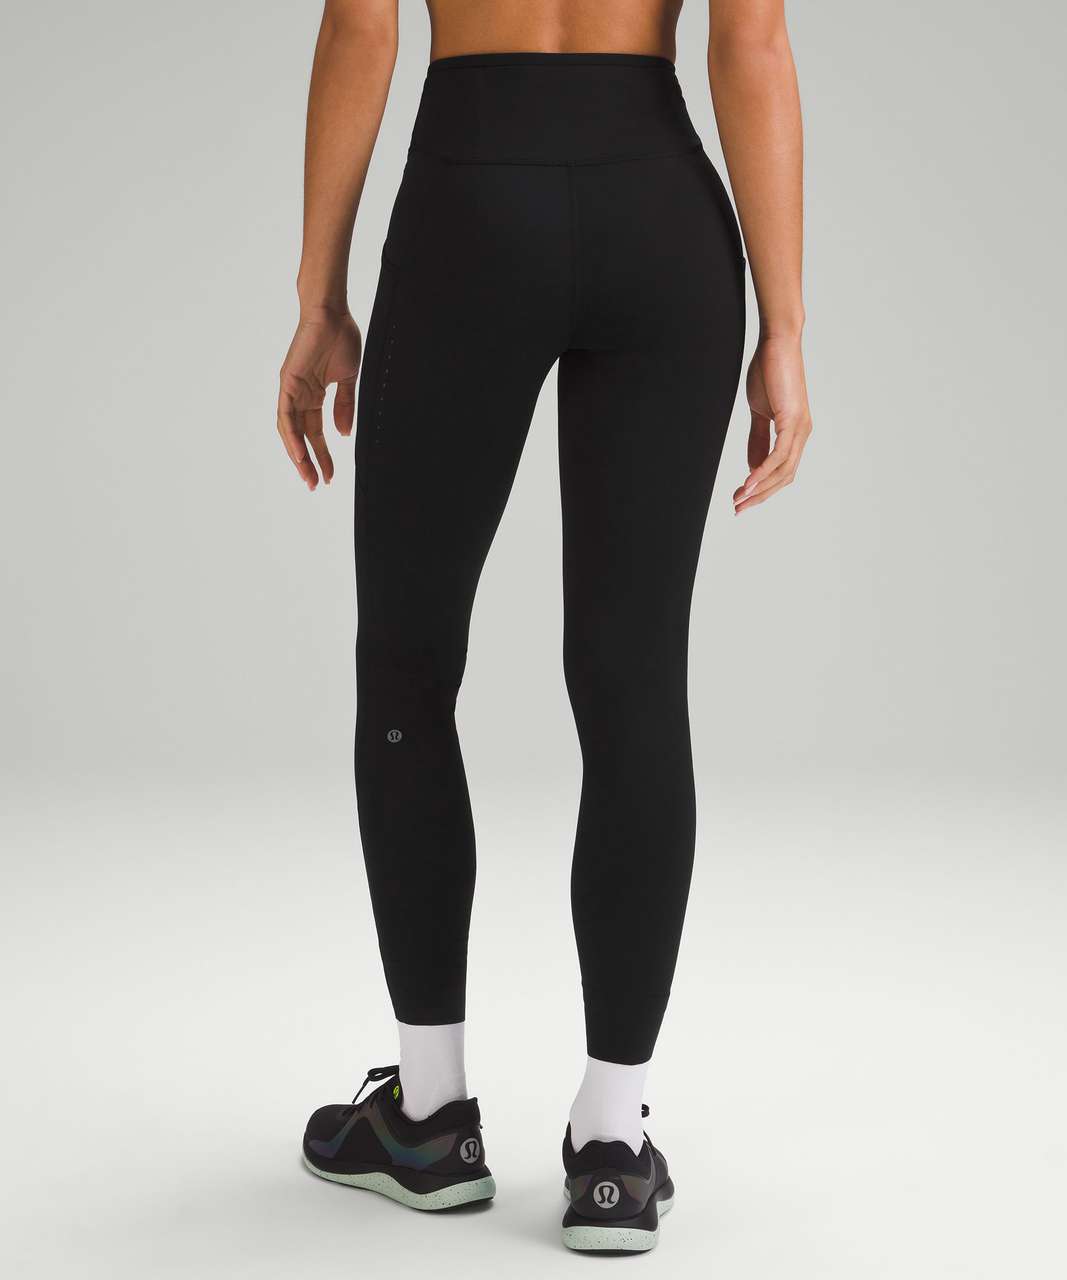 LULULEMON Fast and Free 7/8 Tight 25 (Black (Non-Reflective), 6) at   Women's Clothing store